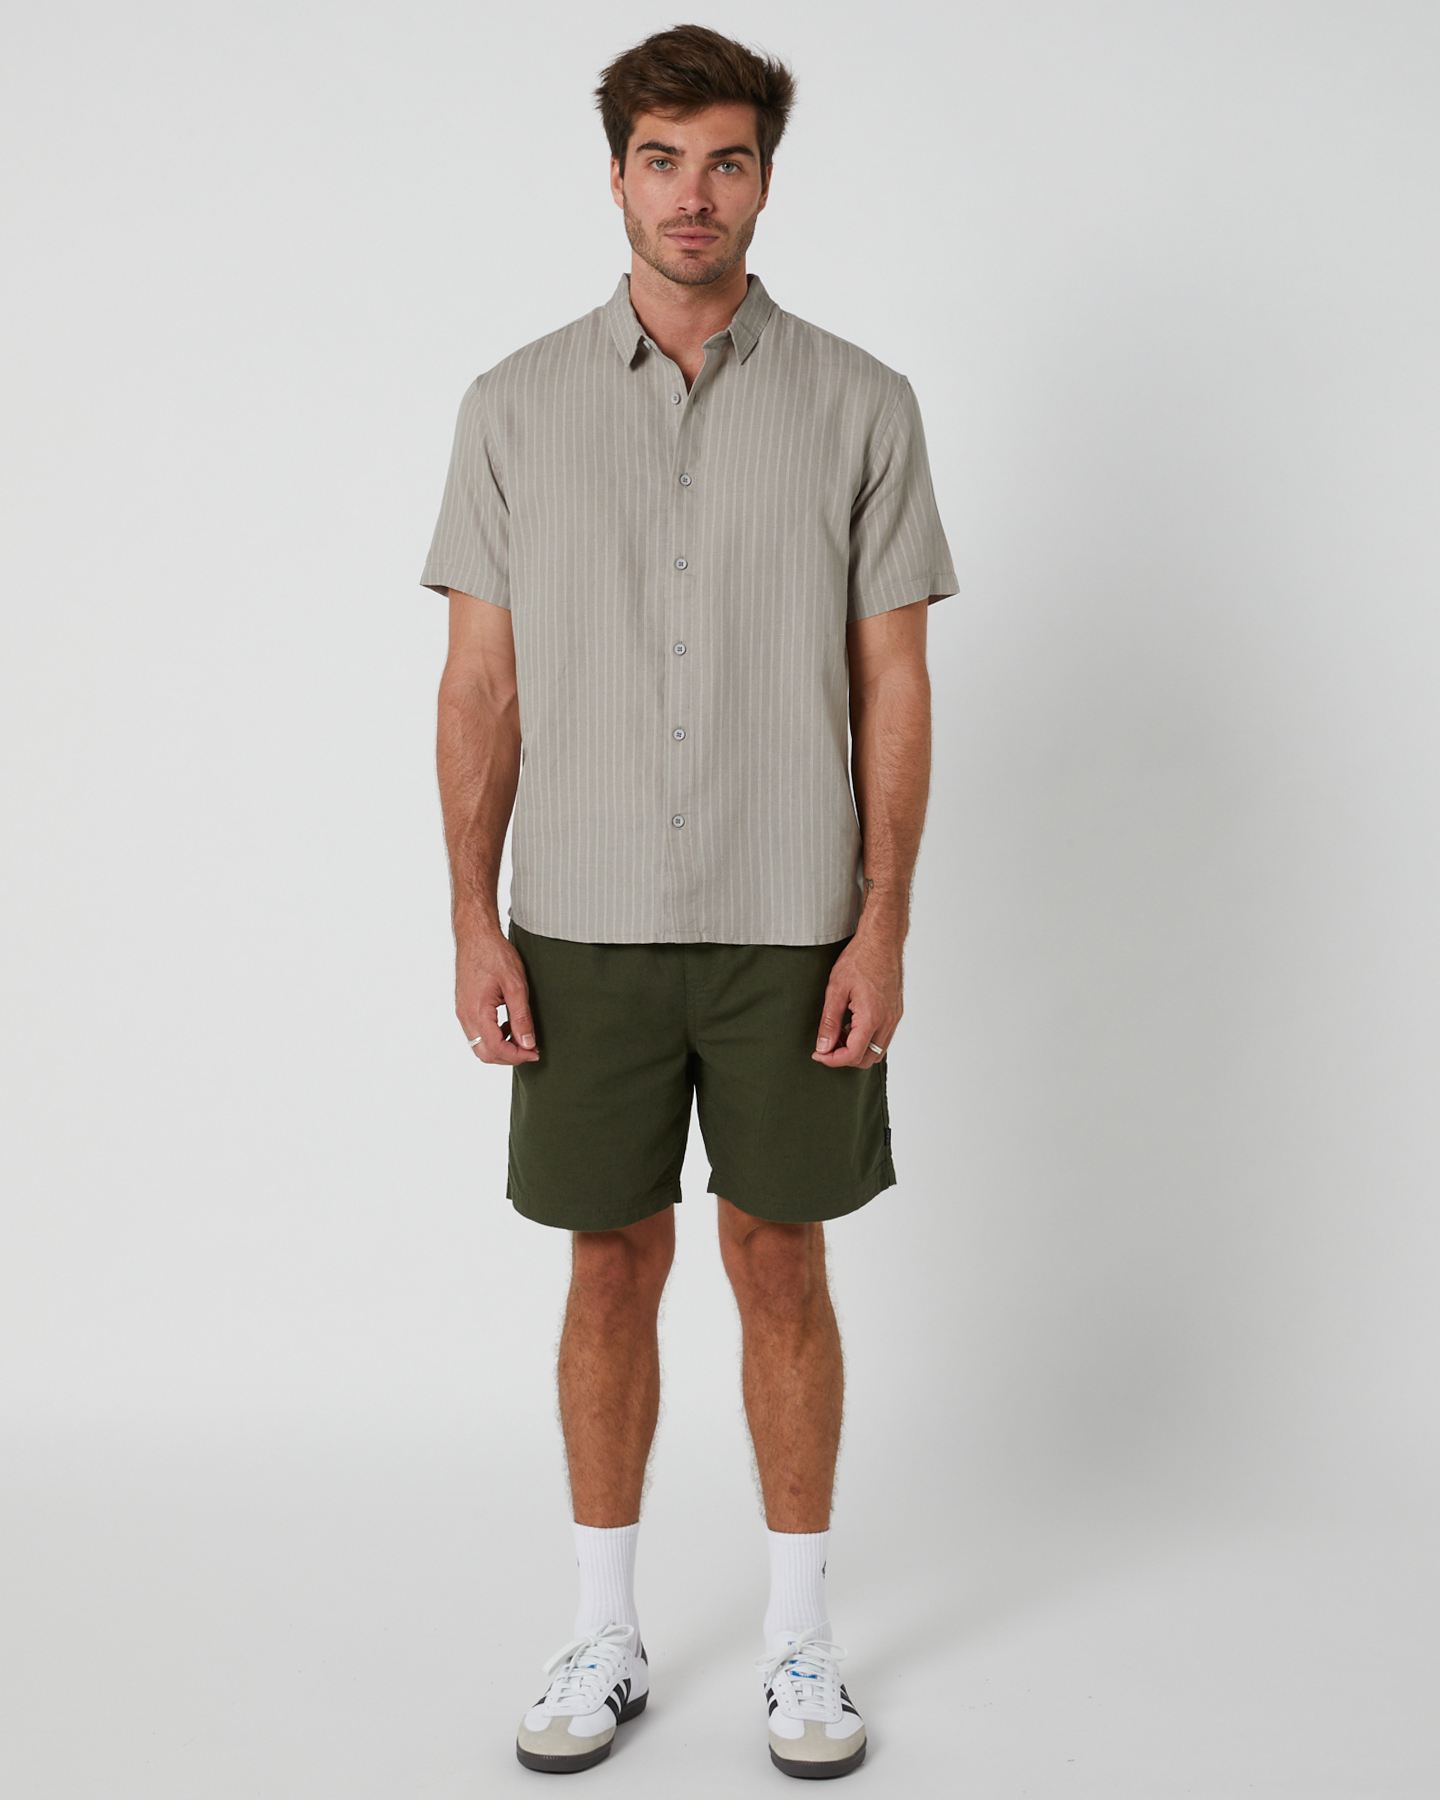 Silent Theory Johnston Ss Shirt - Olive | SurfStitch